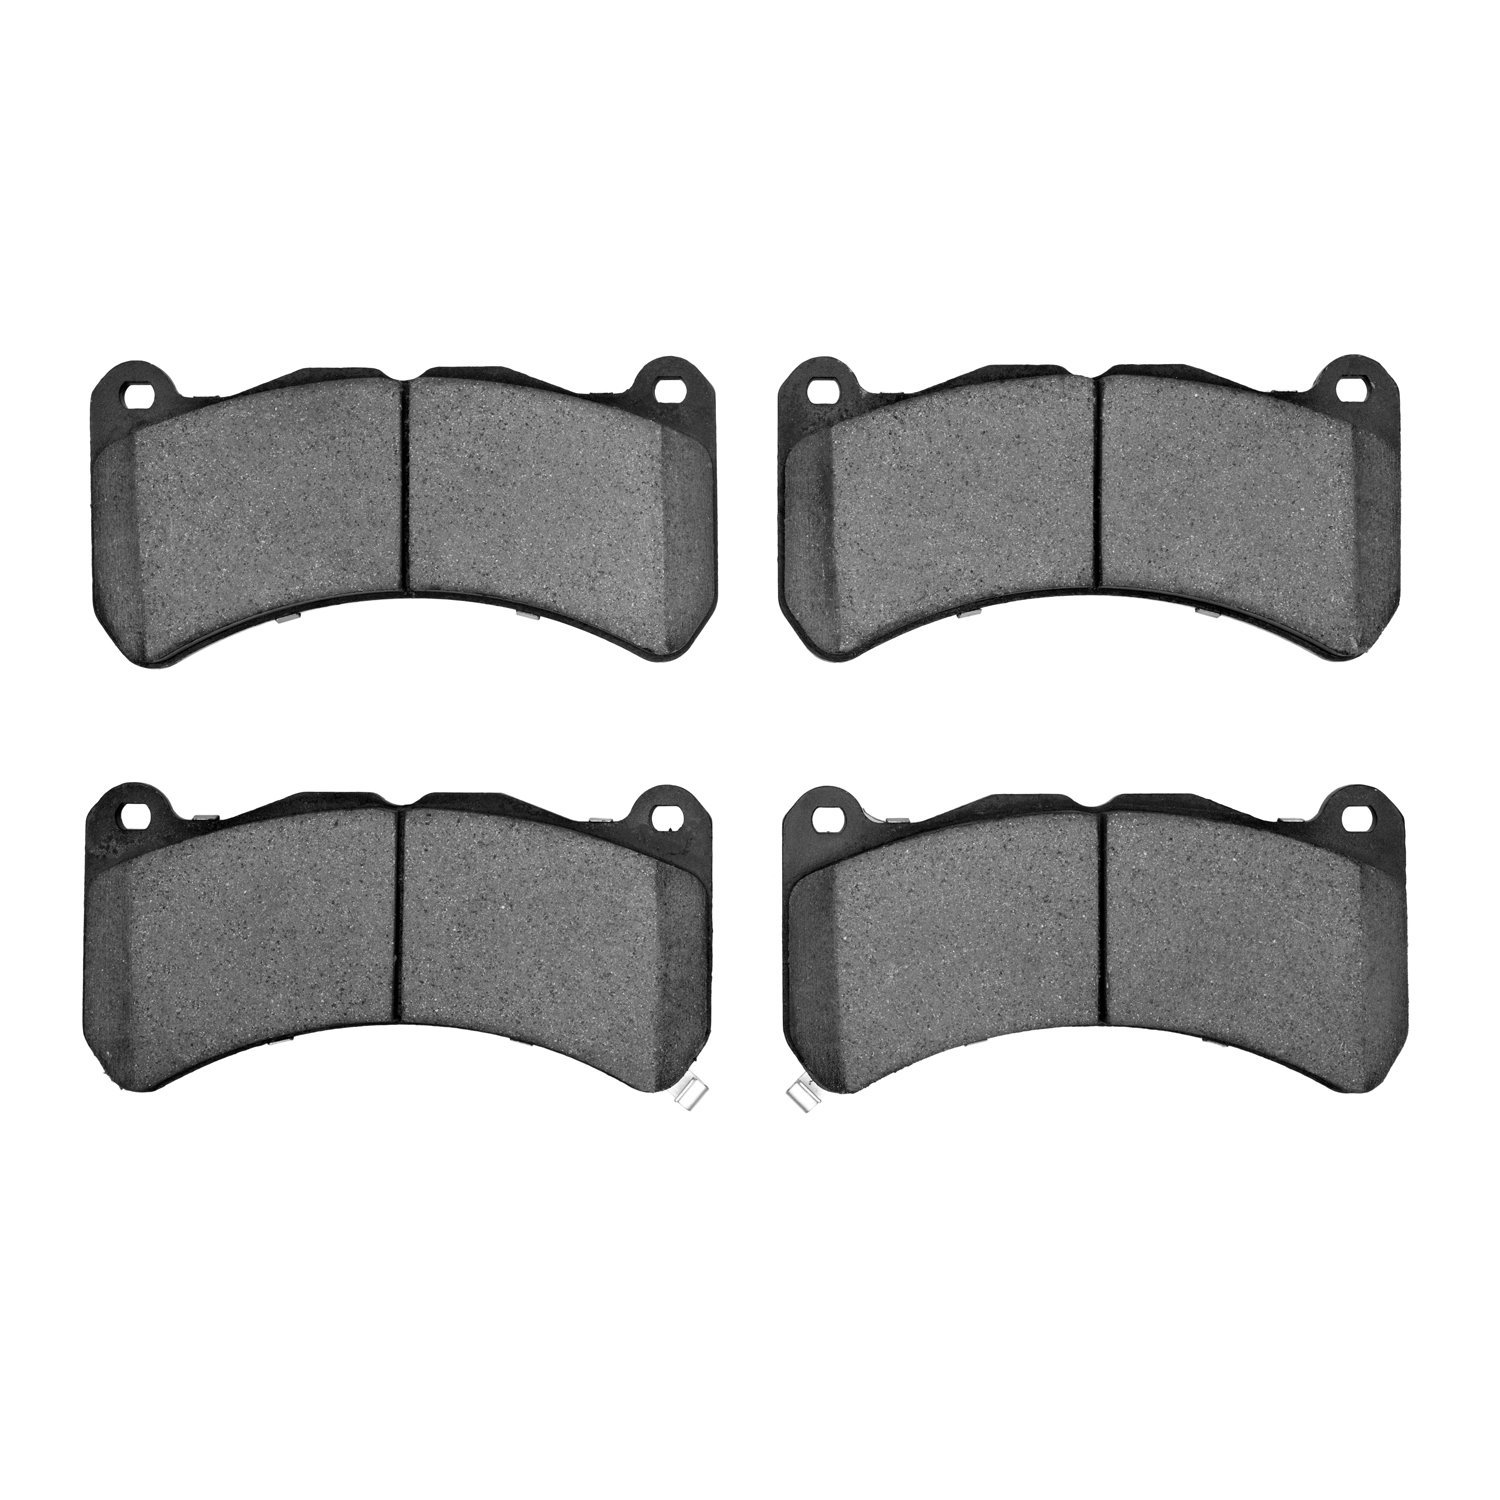 1551-1365-00 5000 Advanced Low-Metallic Brake Pads, 2008-2021 Multiple Makes/Models, Position: Front